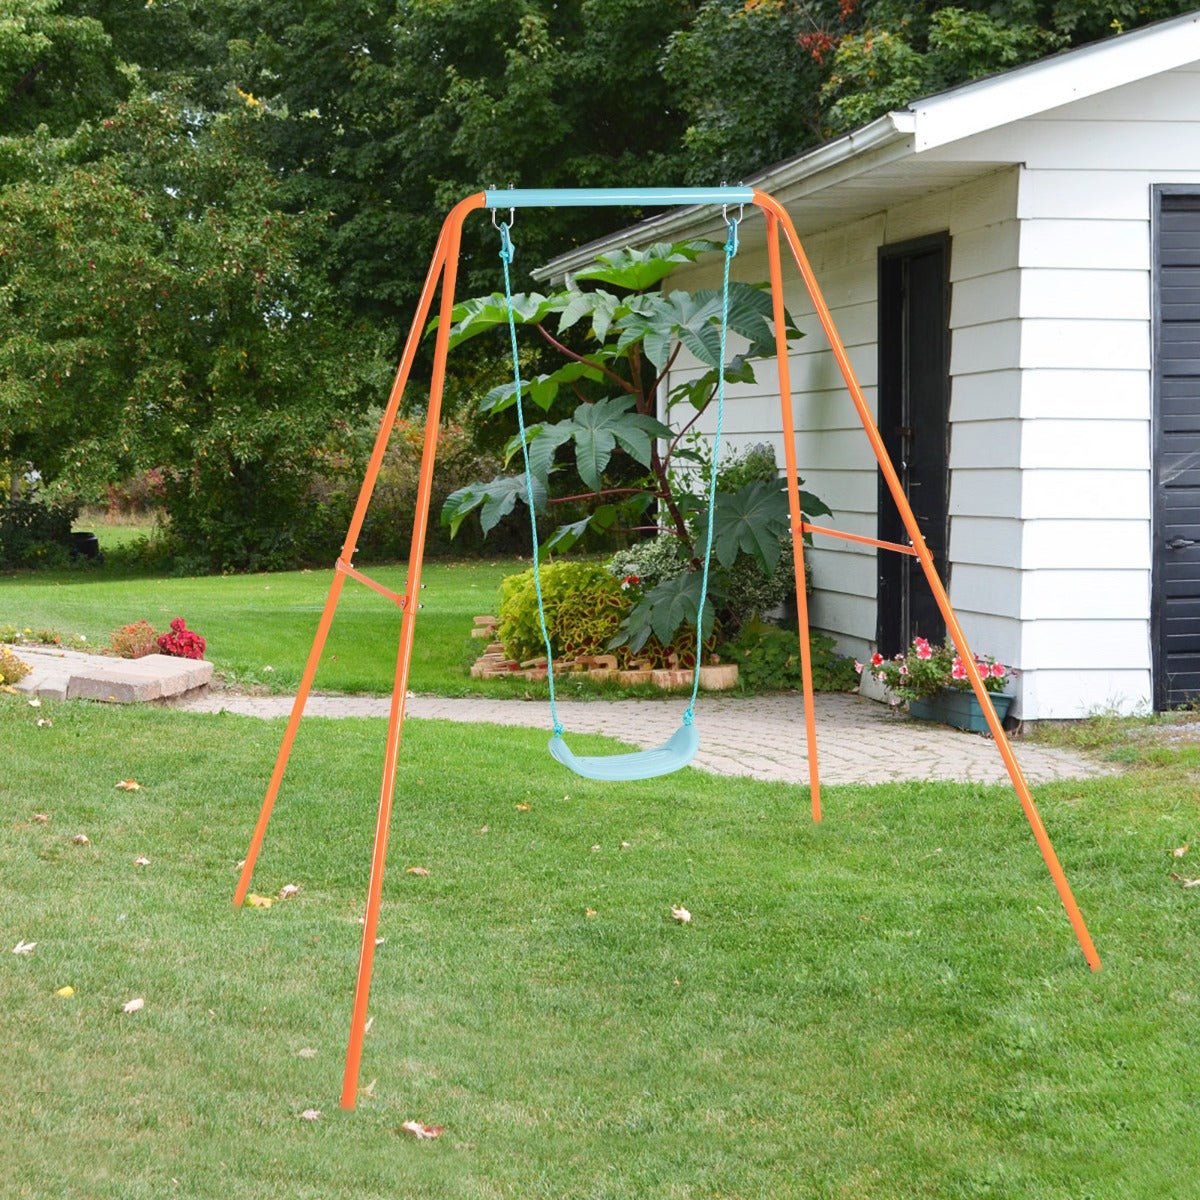 Orange Metal Swing Set: A-Frame Stability for Outdoor Fun